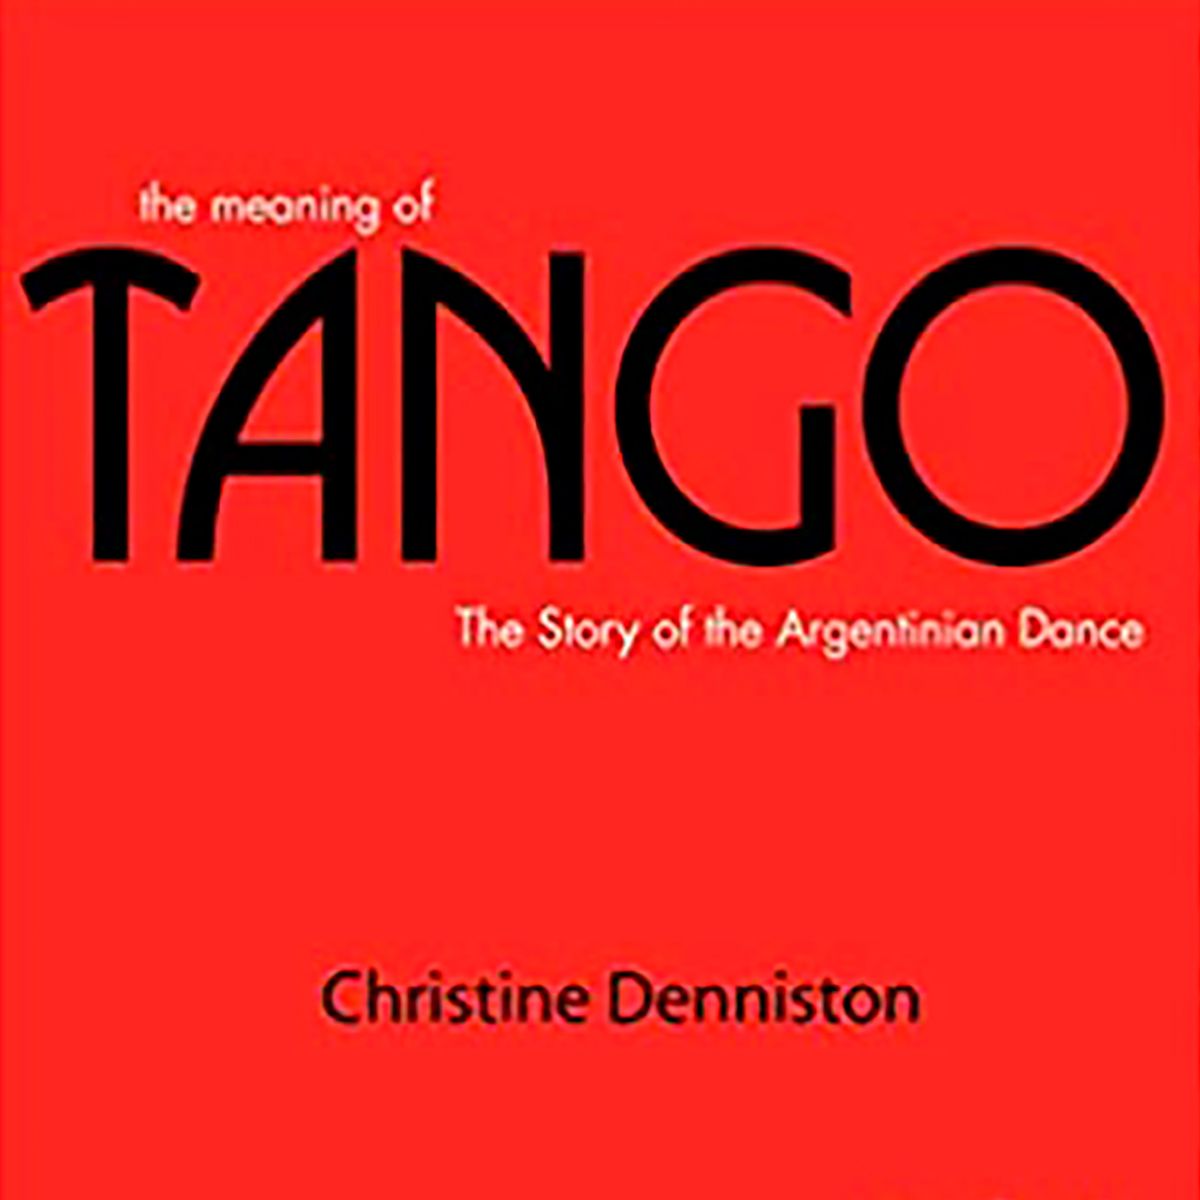 "The meaning of Tango", book by Christine Denniston